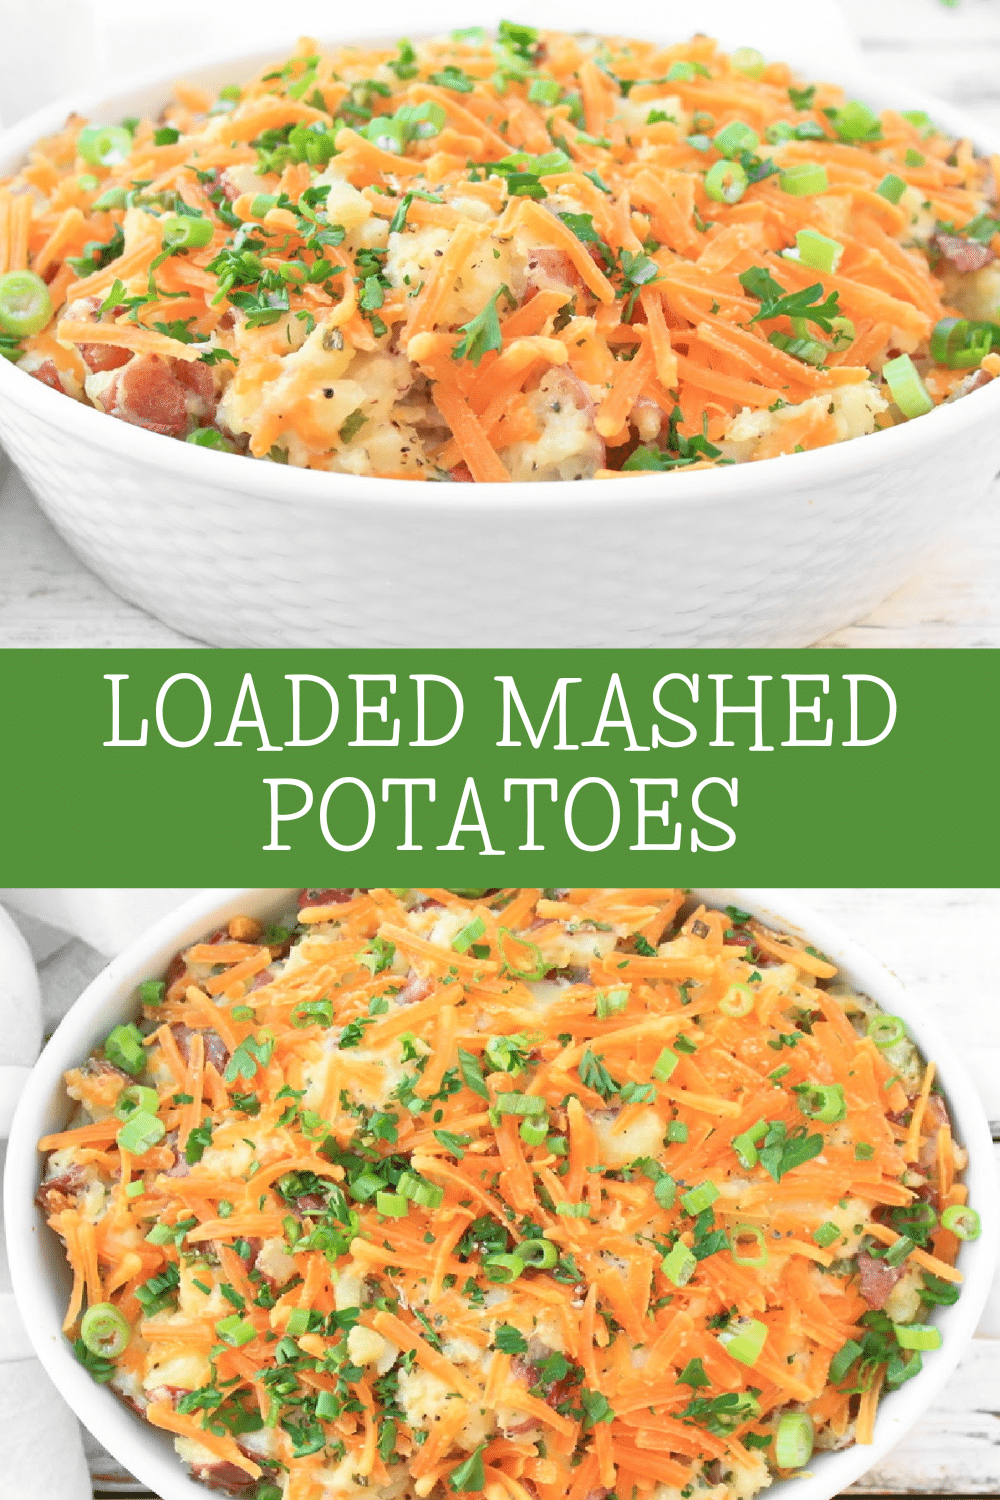 Loaded Mashed Potatoes ~ All the goodness of a classic loaded baked potato in an easy casserole dish! Easy side dish for the holidays! via @thiswifecooks